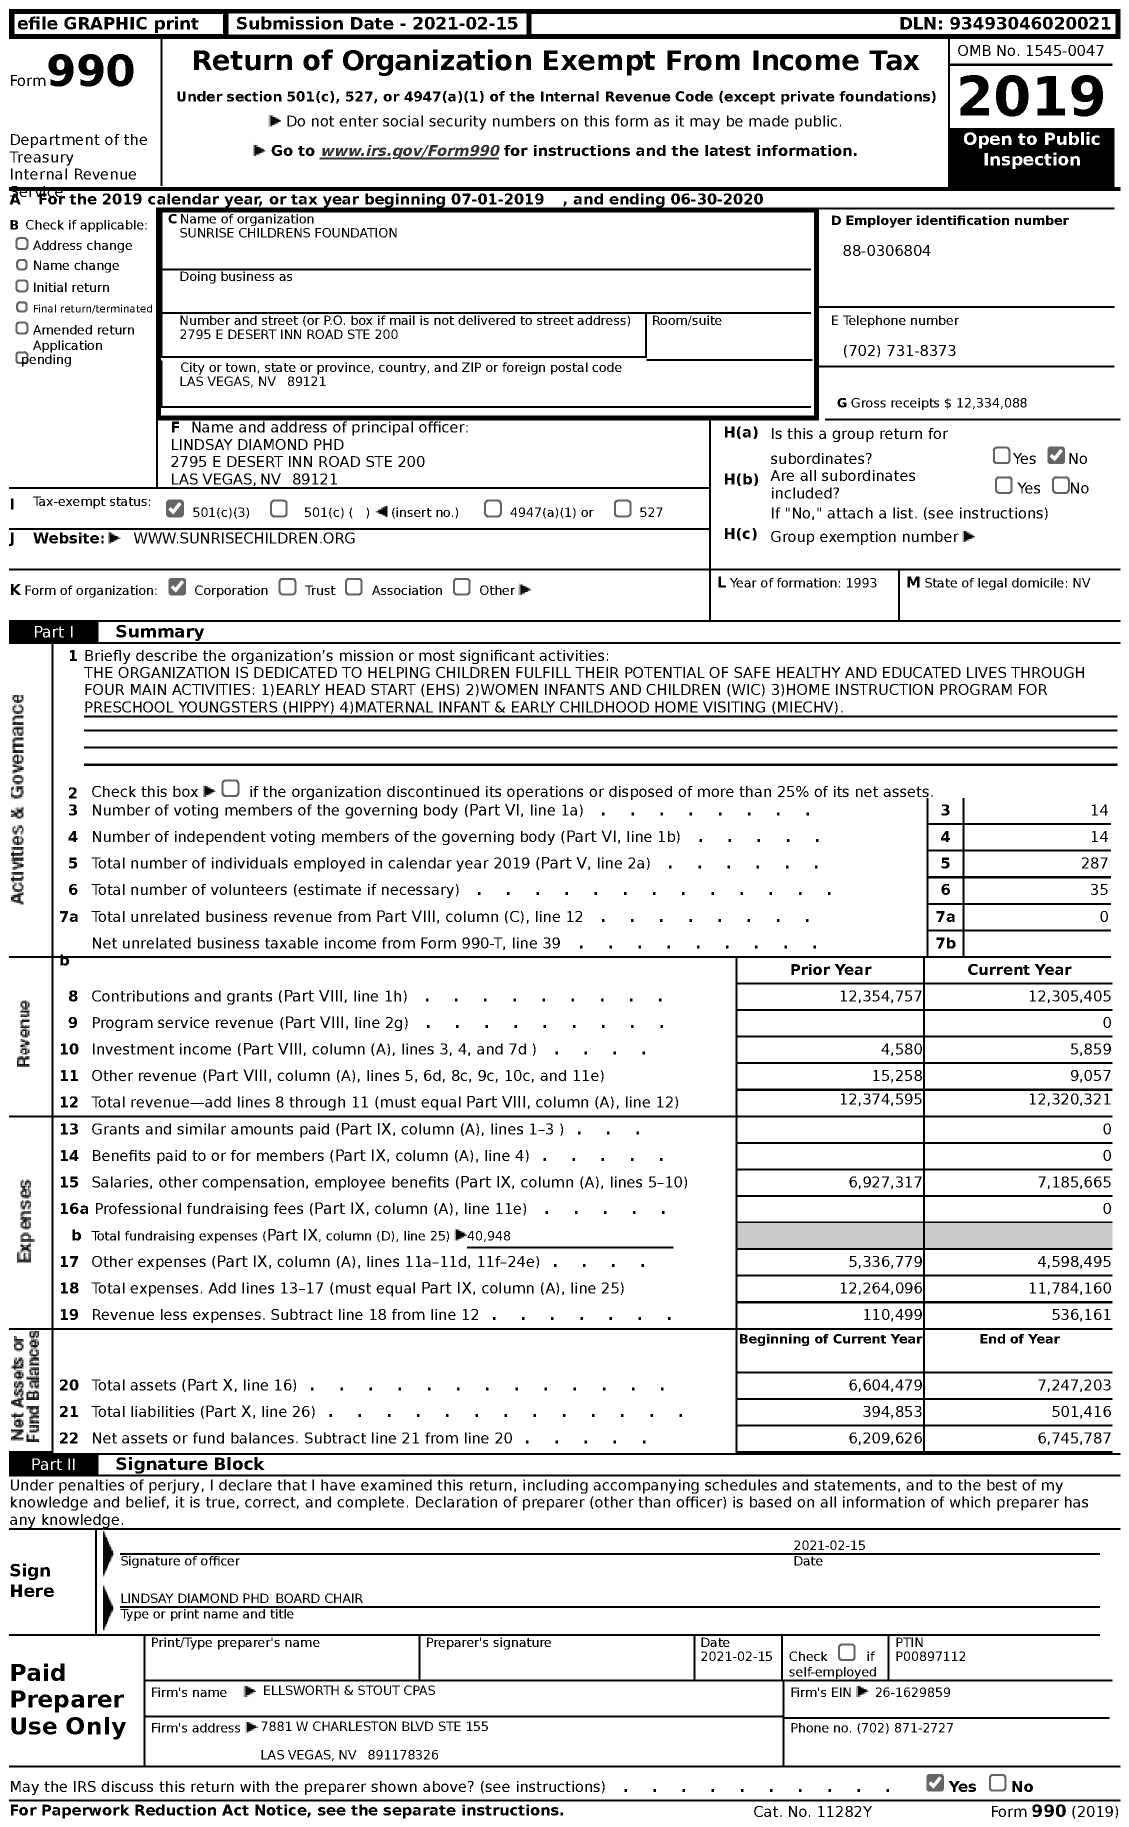 Image of first page of 2019 Form 990 for Sunrise Childrens Foundation (SCF)